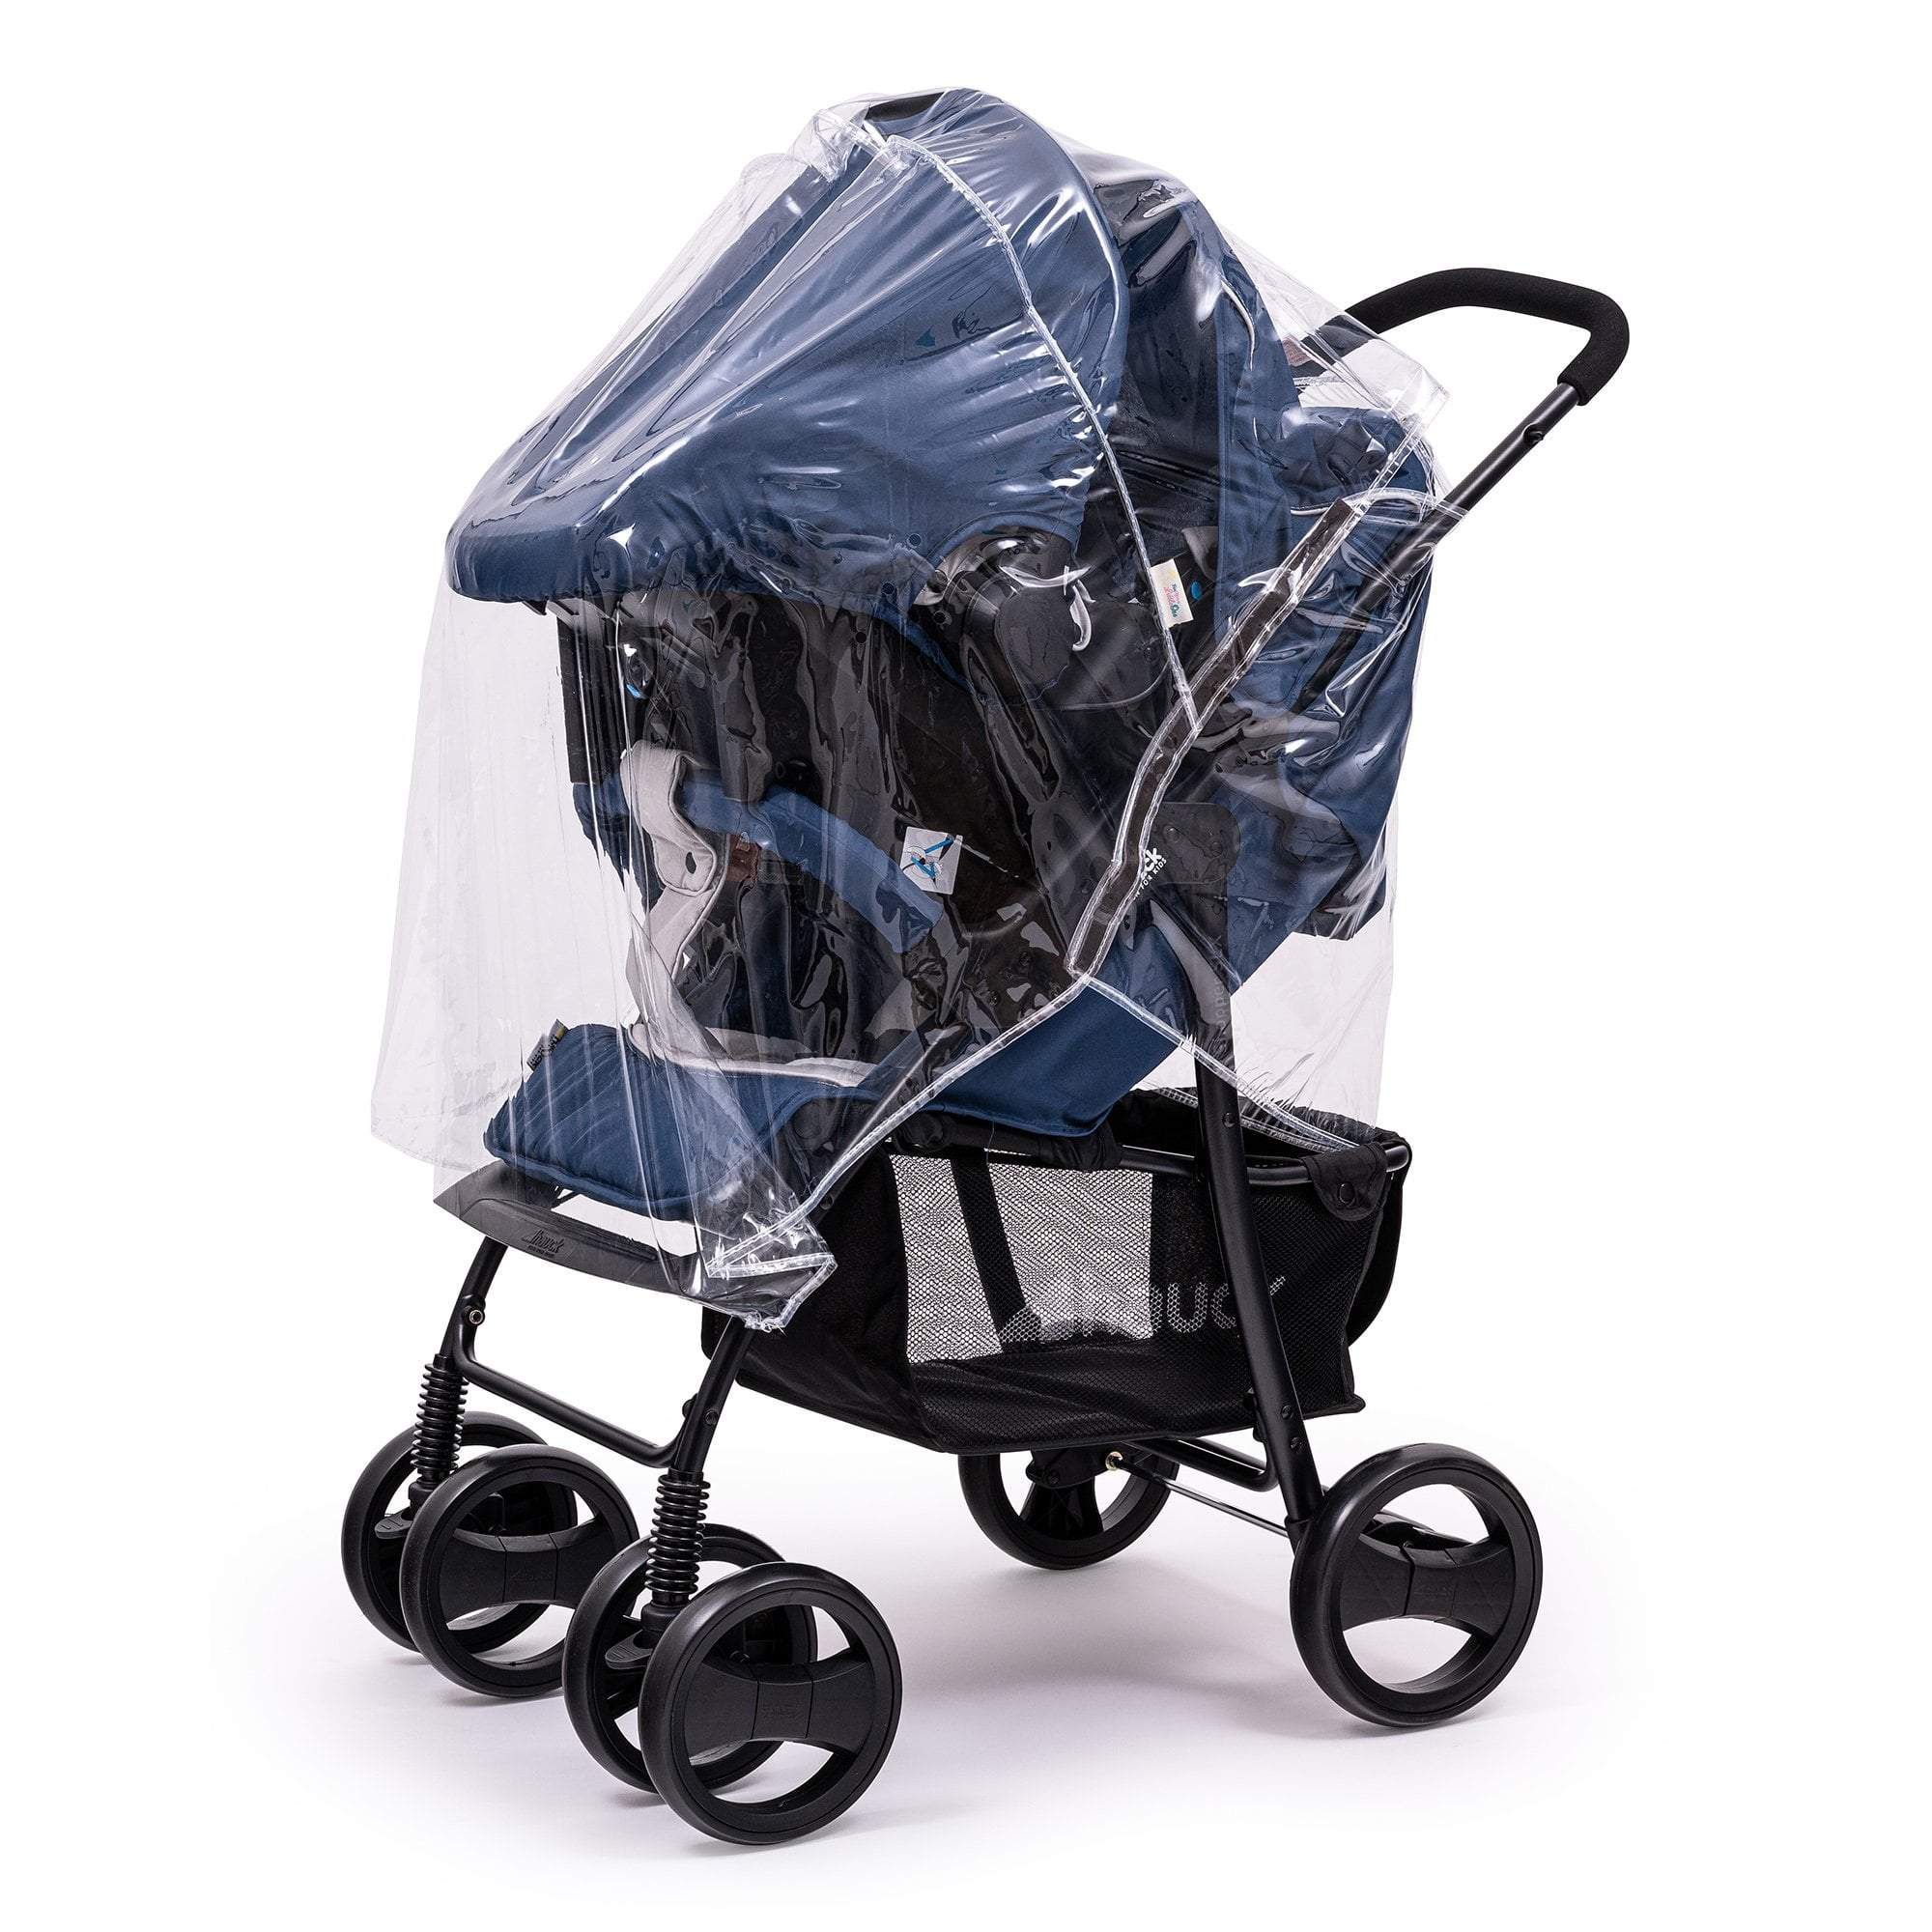 Travel System Raincover Compatible with Greentom - Fits All Models - For Your Little One